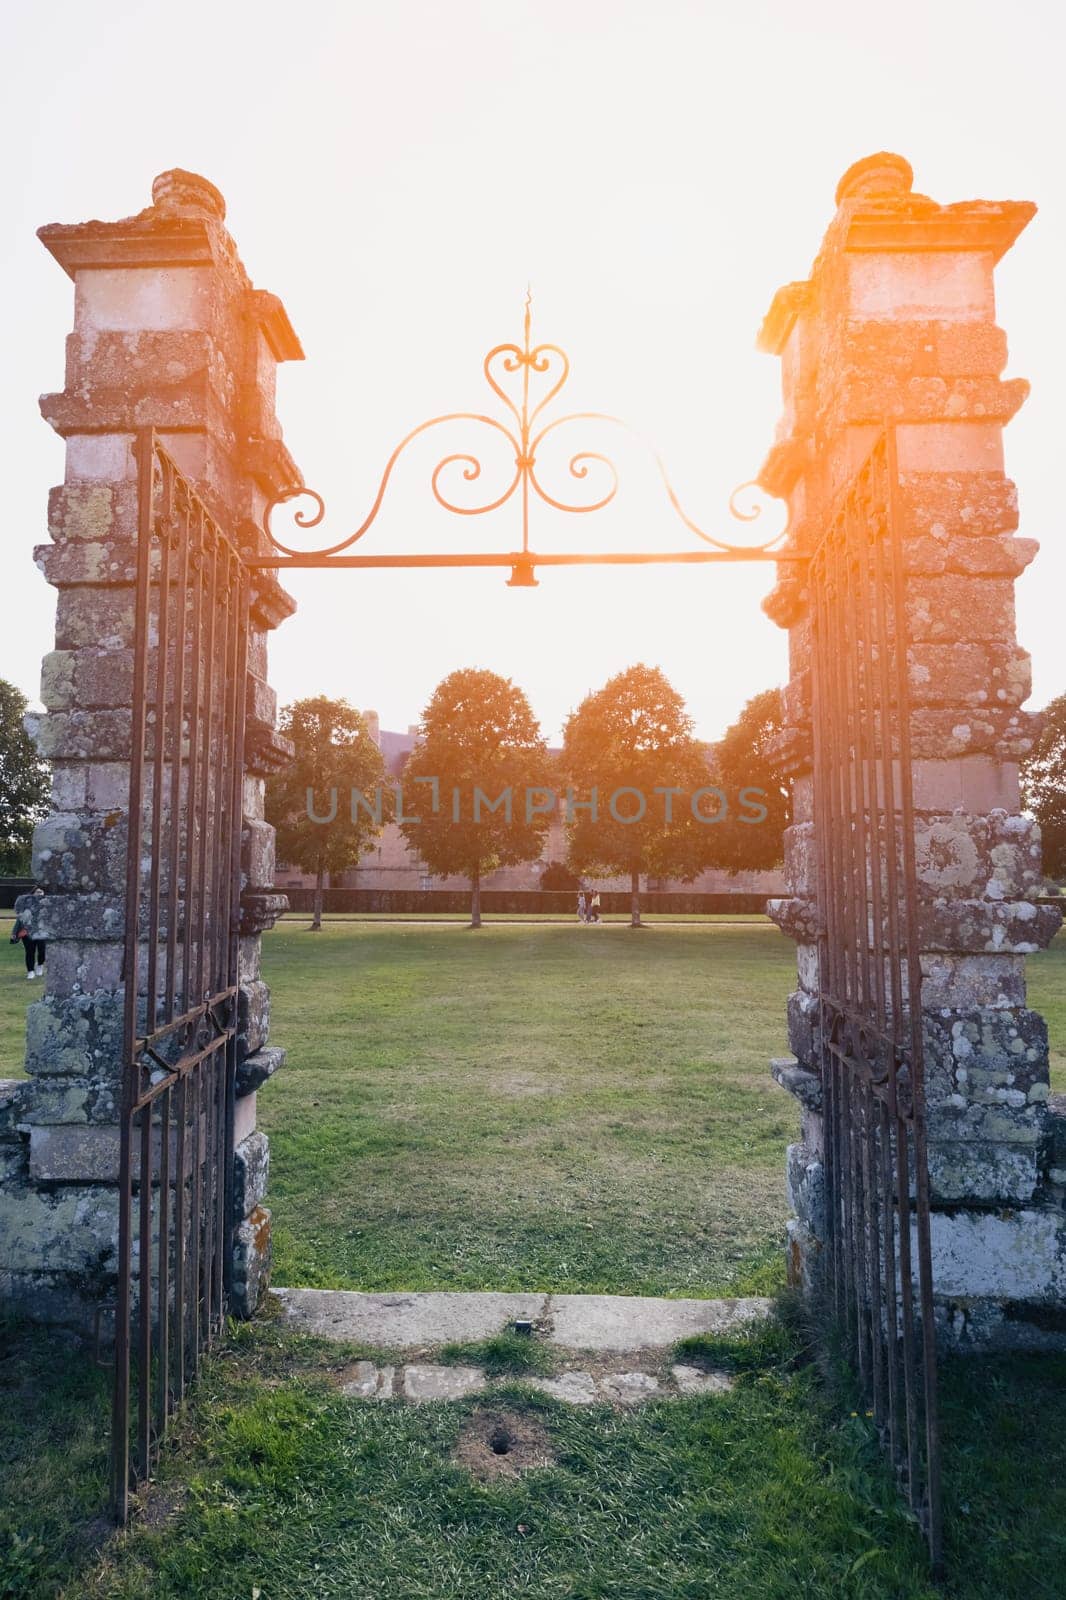 forged old gate close-up, the entrance to the castle, the gate was taken at sunset silhouette. A beautiful landscape has a place for an inscription by PopOff